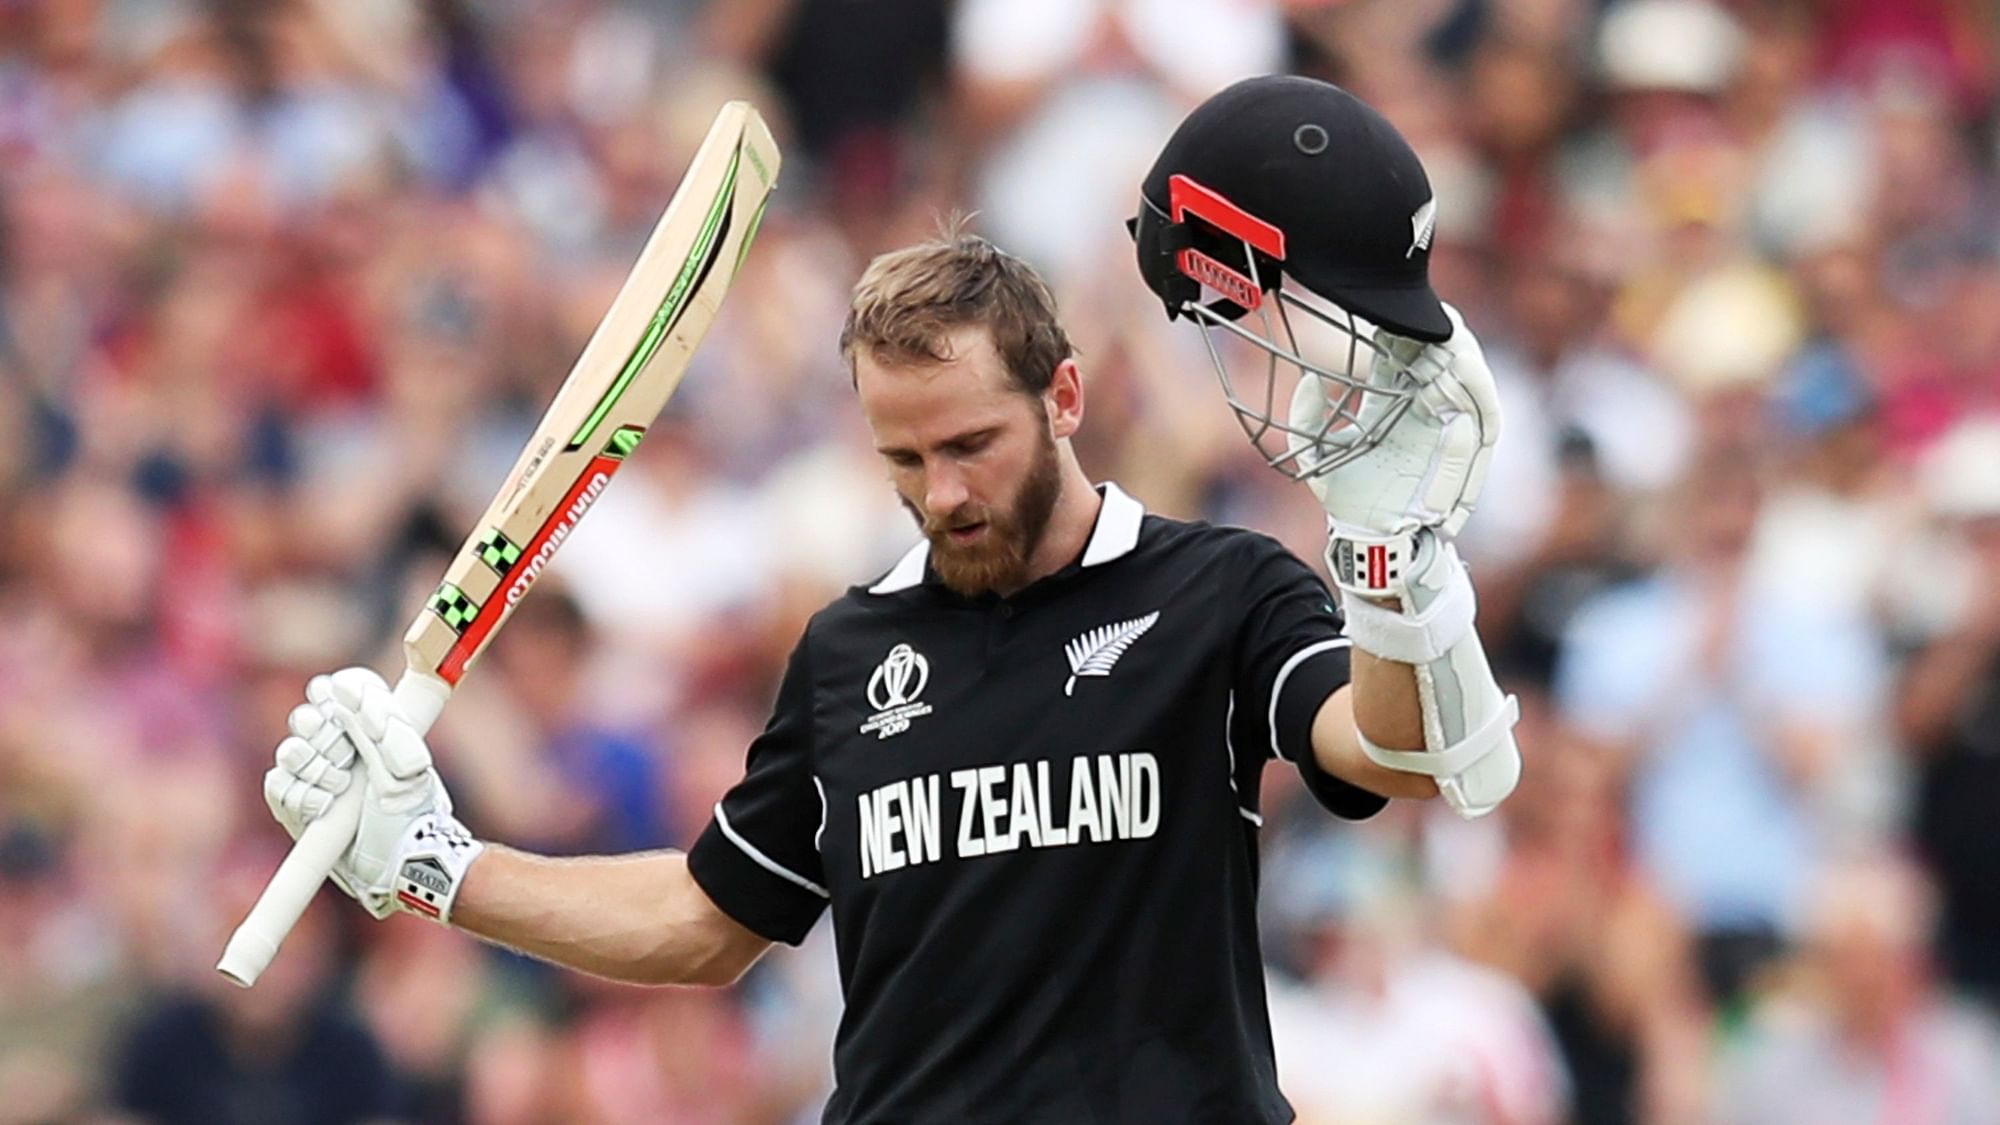 Skipper Kane Williamson rescued New Zealand with a career-best 148 against West Indies.